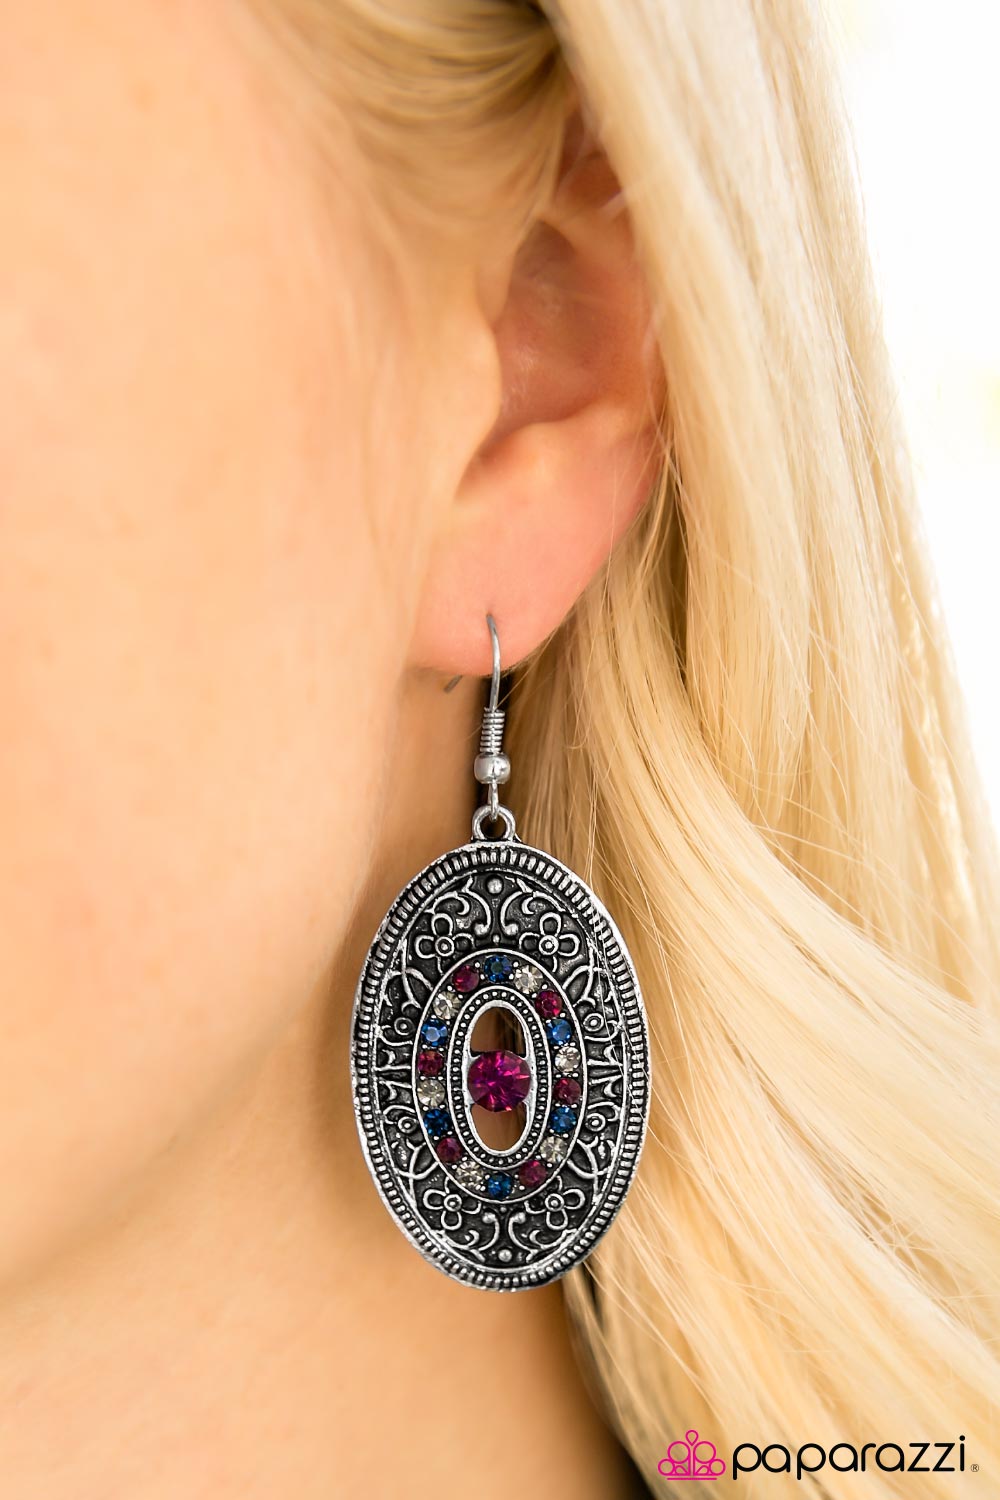 After Ever After - Multi - Paparazzi earrings